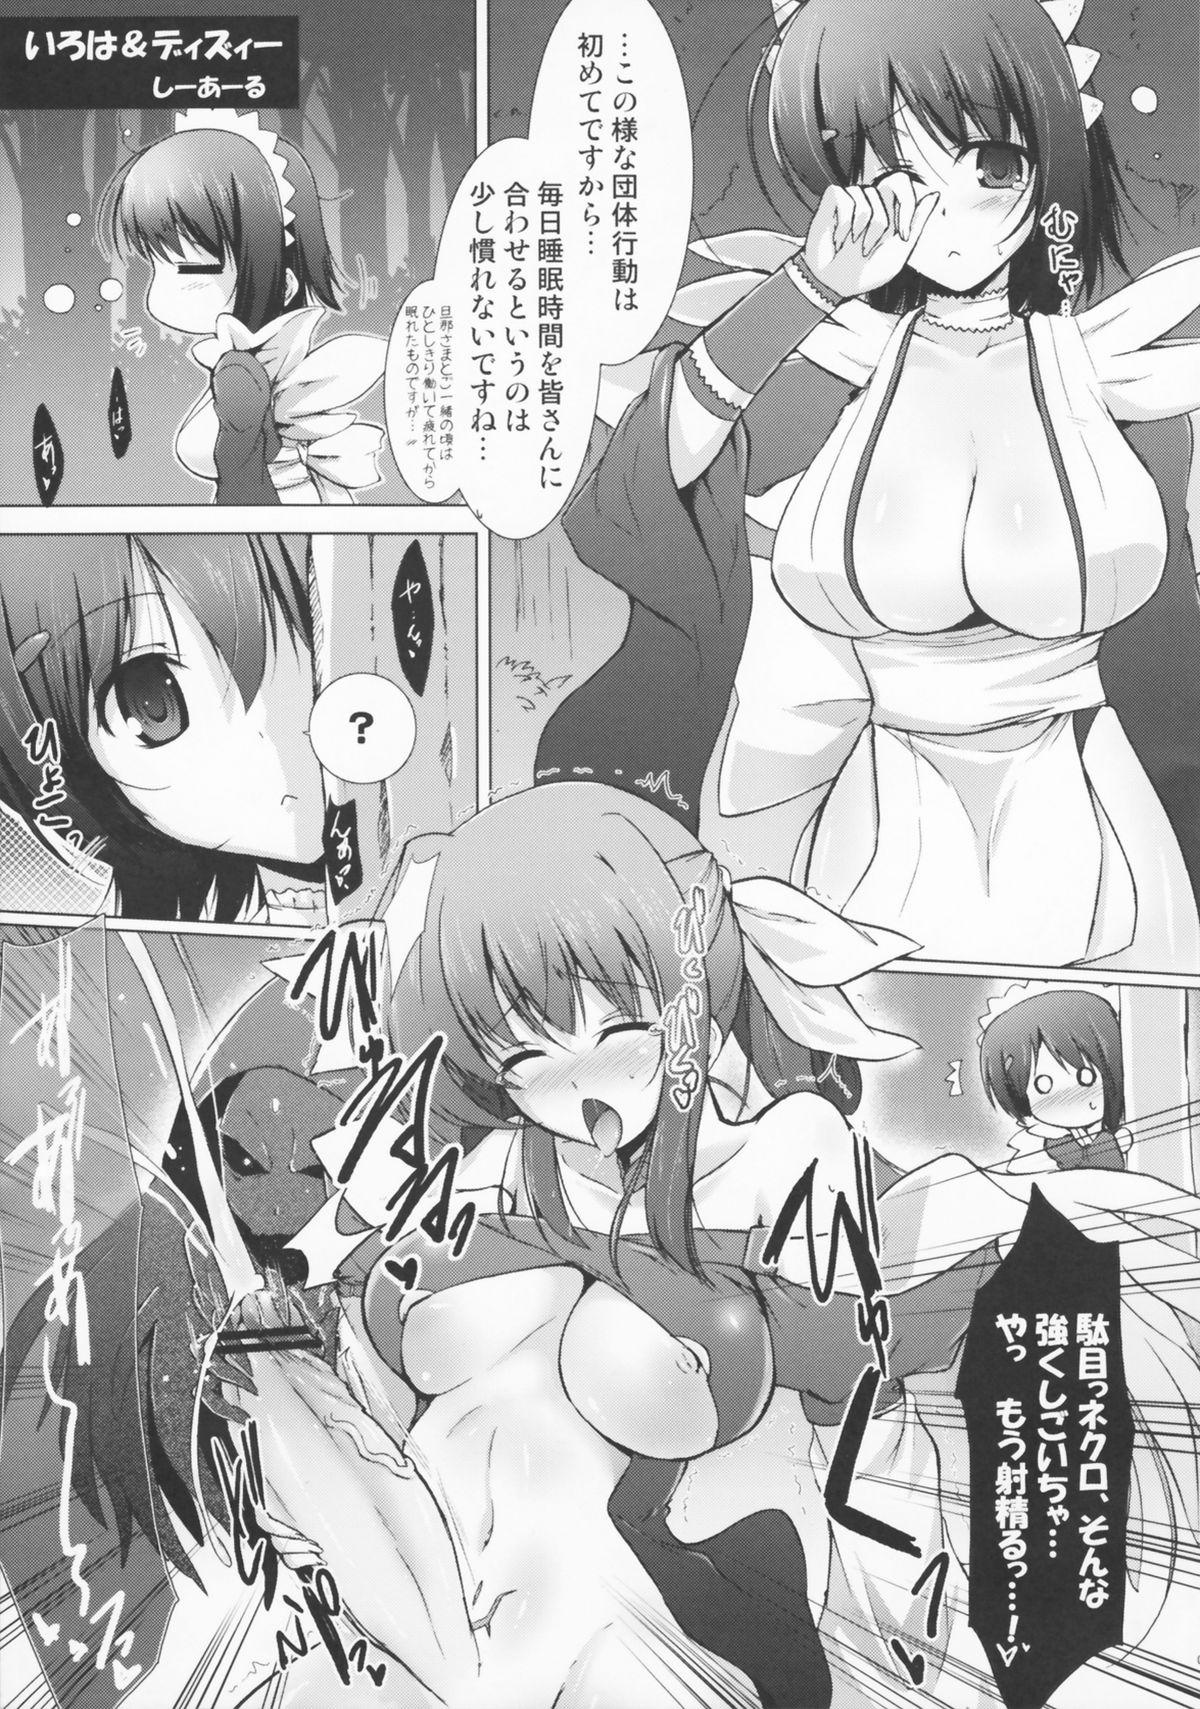 Hot Naked Girl OPEN SESAMI!! - Queens blade Guilty gear Woman Fucking - Page 5